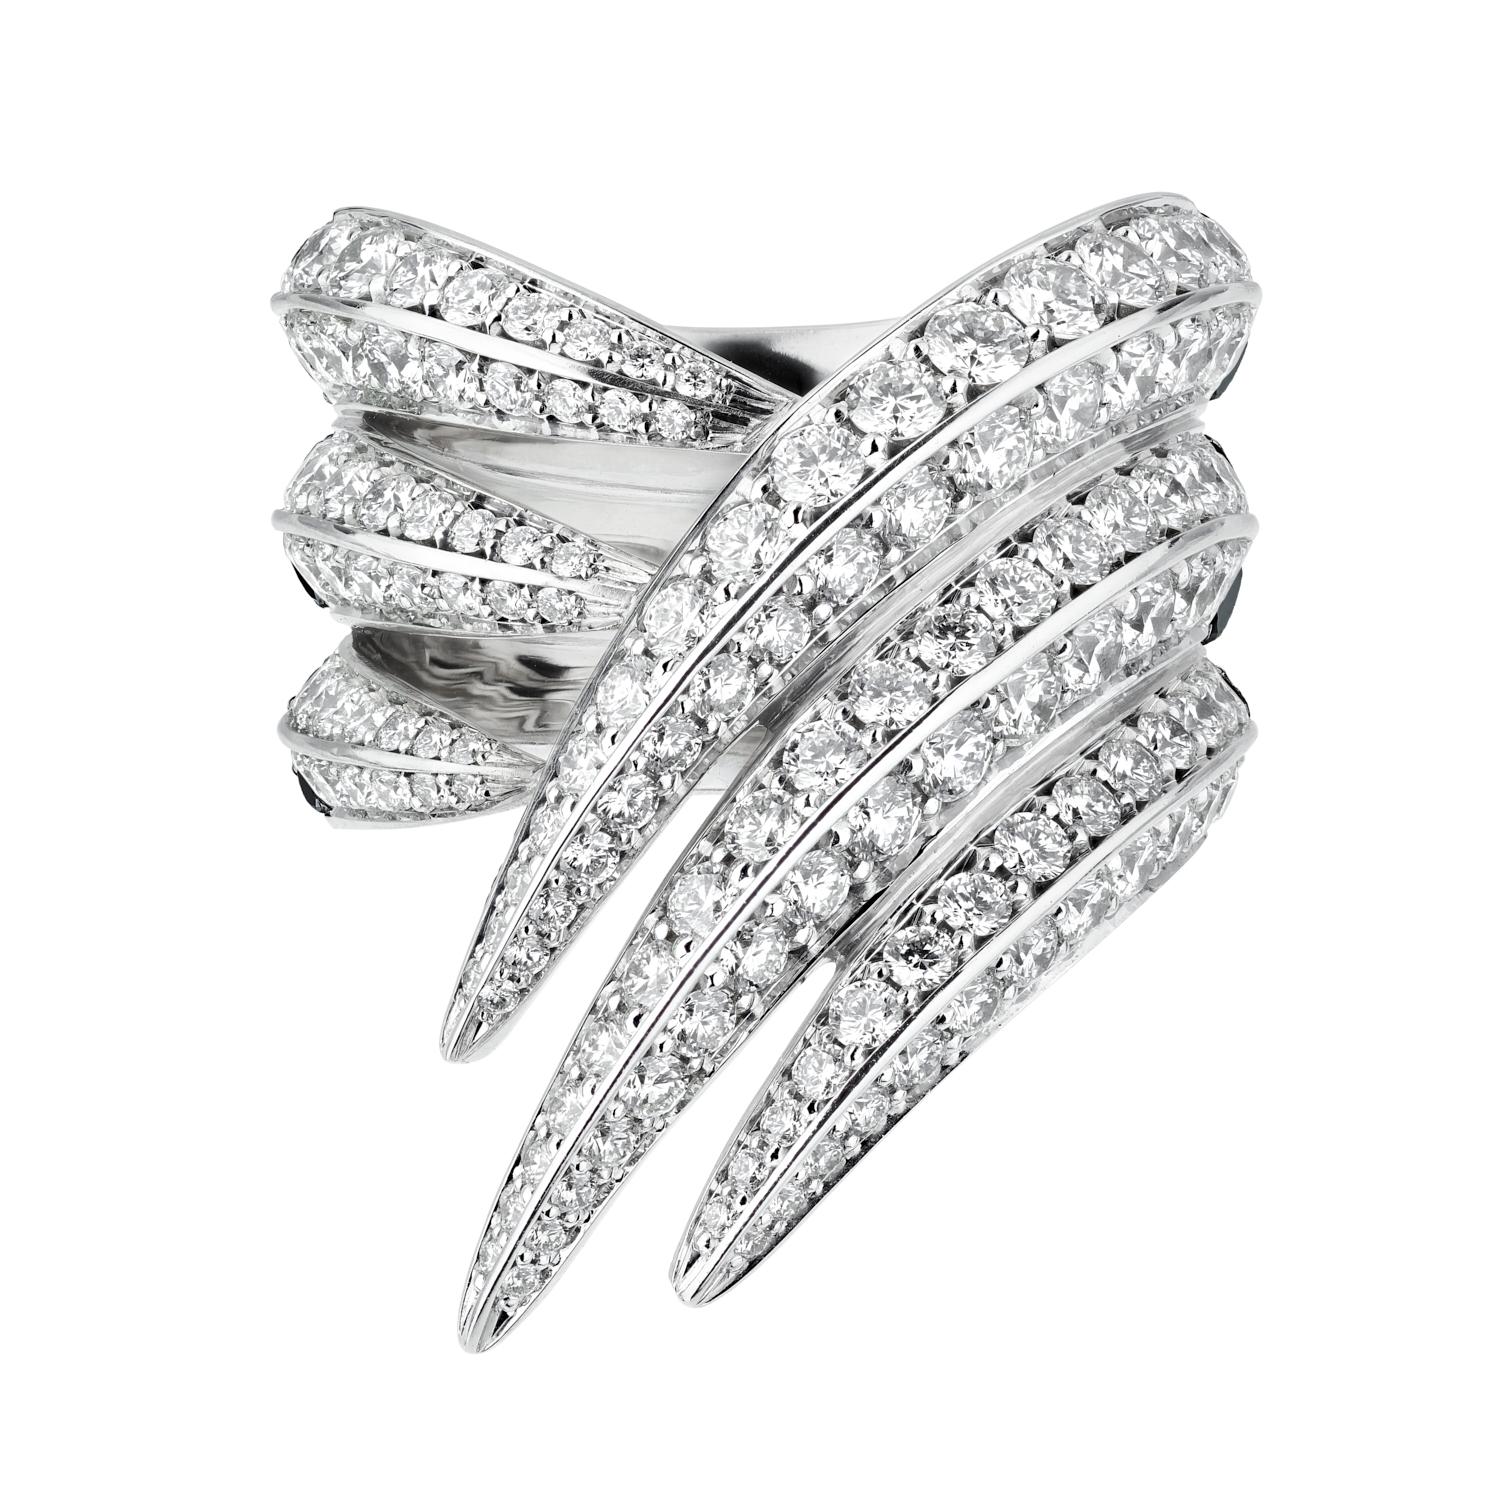 Sabre Fine Triple Ring is handcrafted from 18ct white gold and 2.96cts of brilliant white diamonds - a perfect parure when worn with a coordinated pair of Sabre Fine earrings. A dynamic cluster of tapered silhouettes enclose the finger, in three